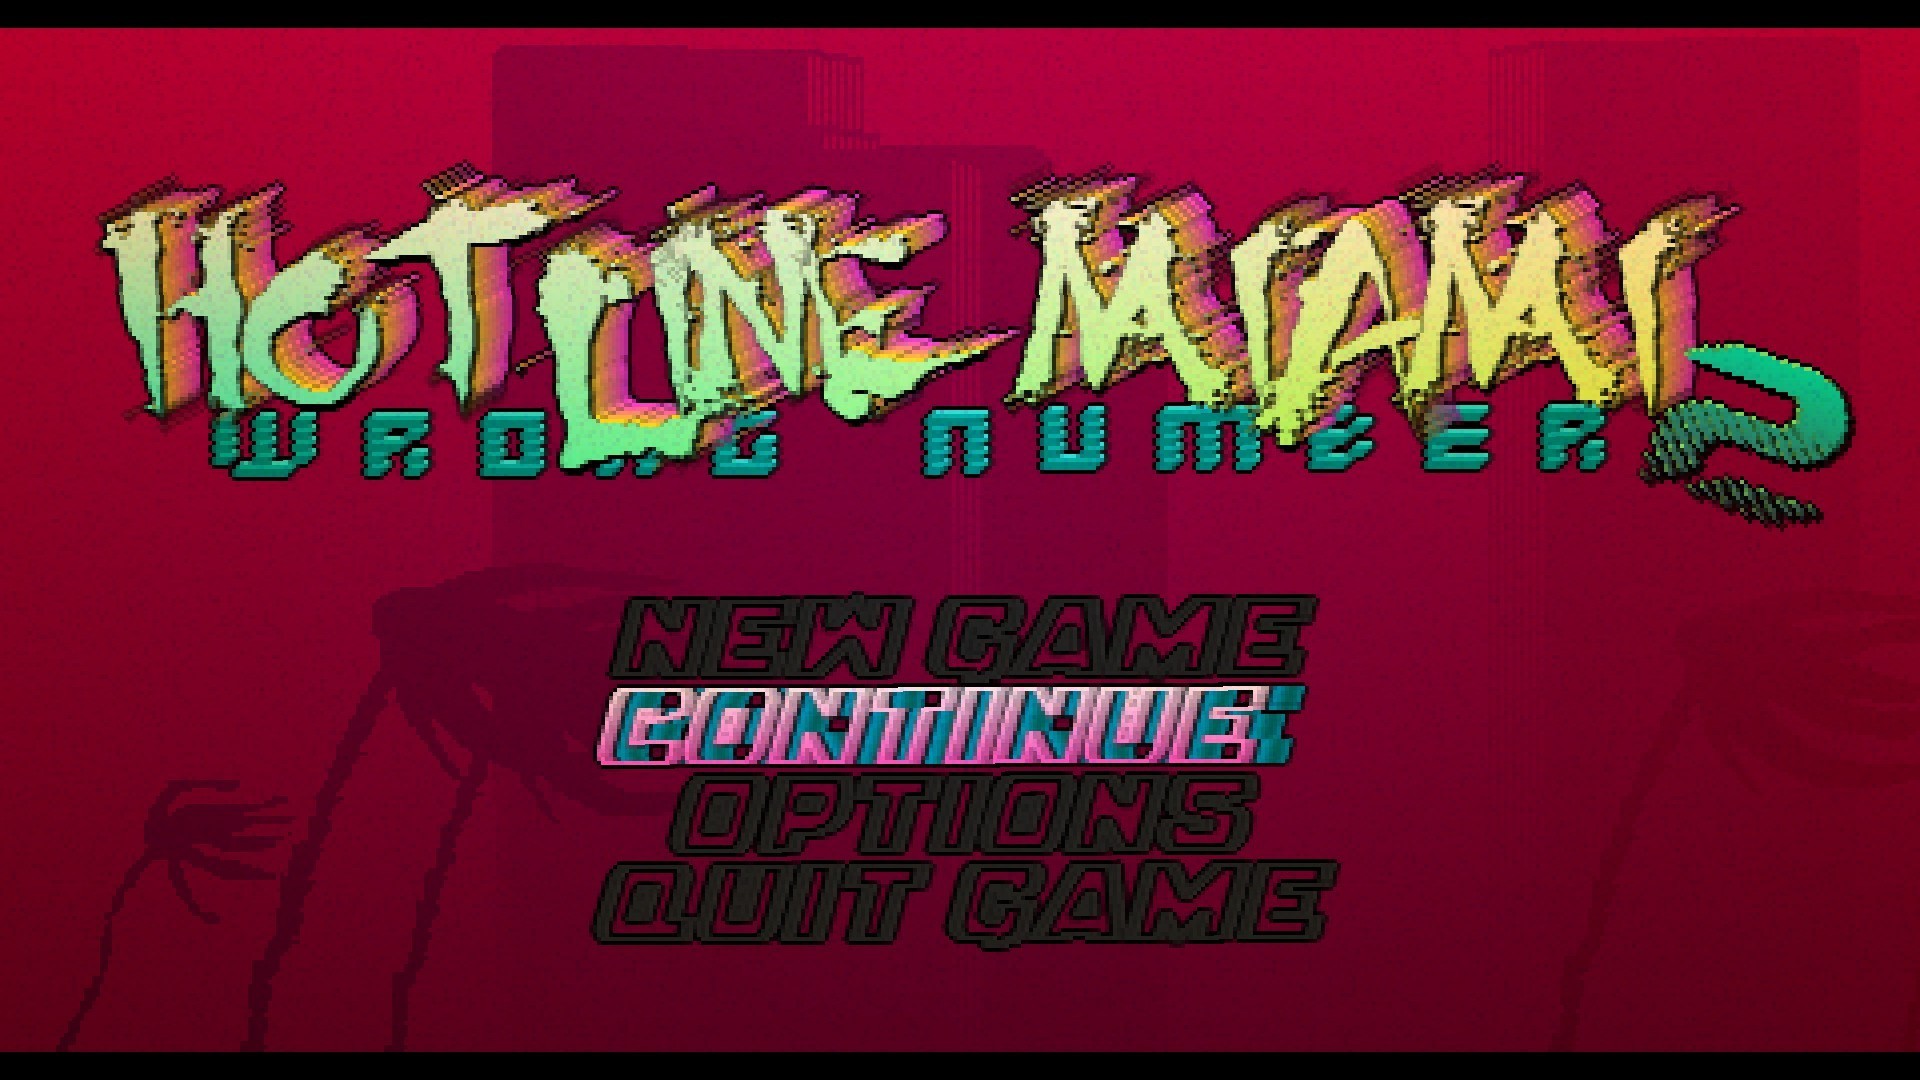 1920x1080 The Refined Geek Â» Hotline Miami 2: Wrong Number: Good Times Never Last.